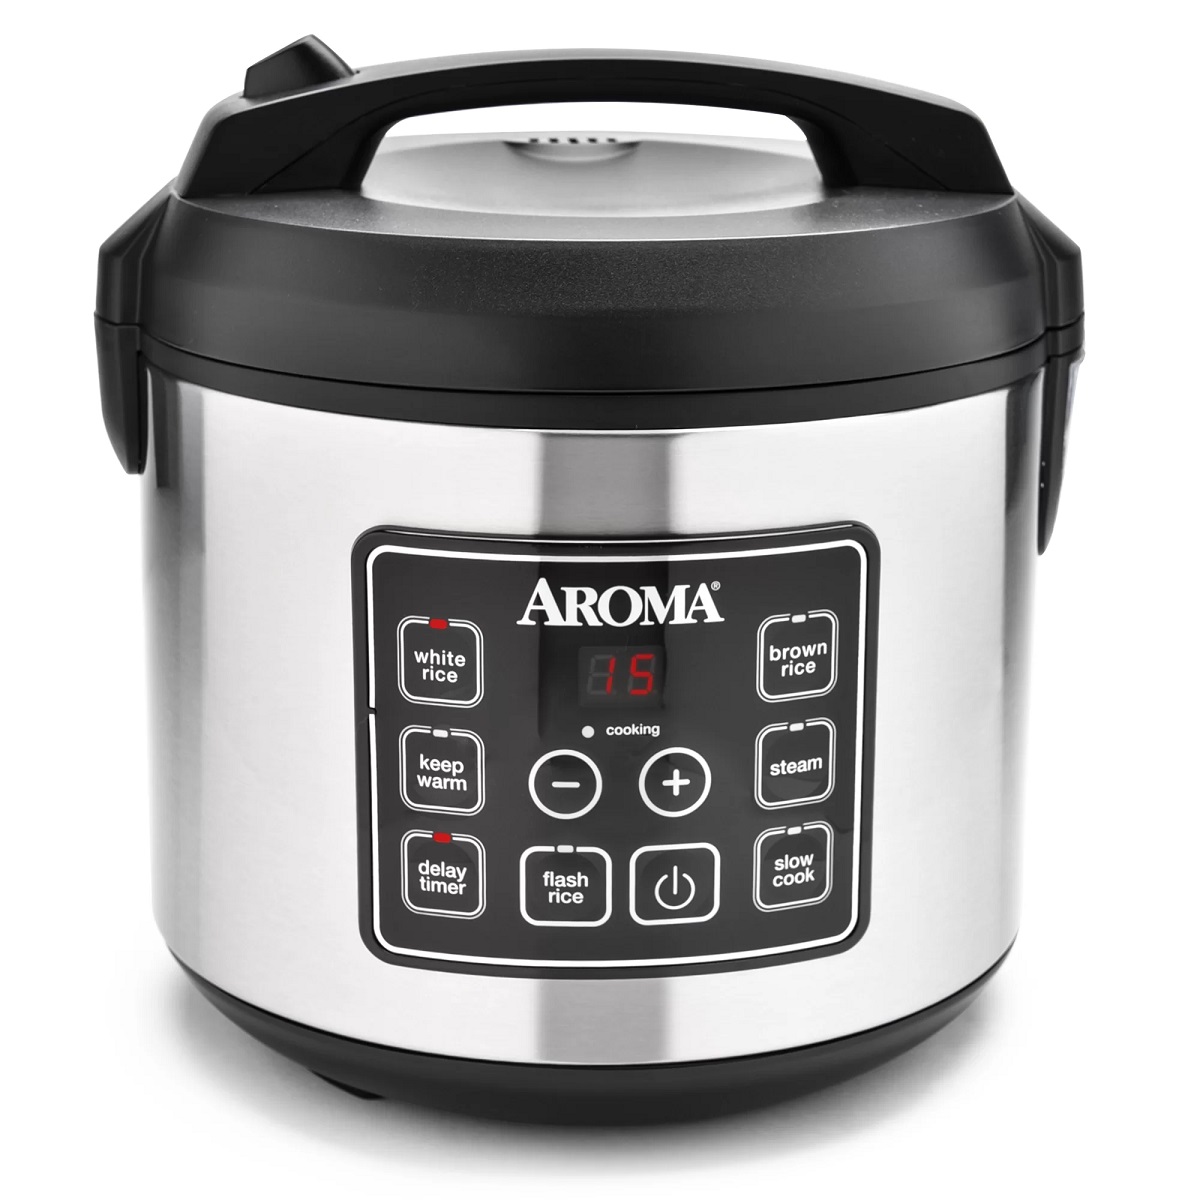 Aroma Housewares ARC 5000SB Digital Rice Review, slower than most but makes  up with multiple modes a 